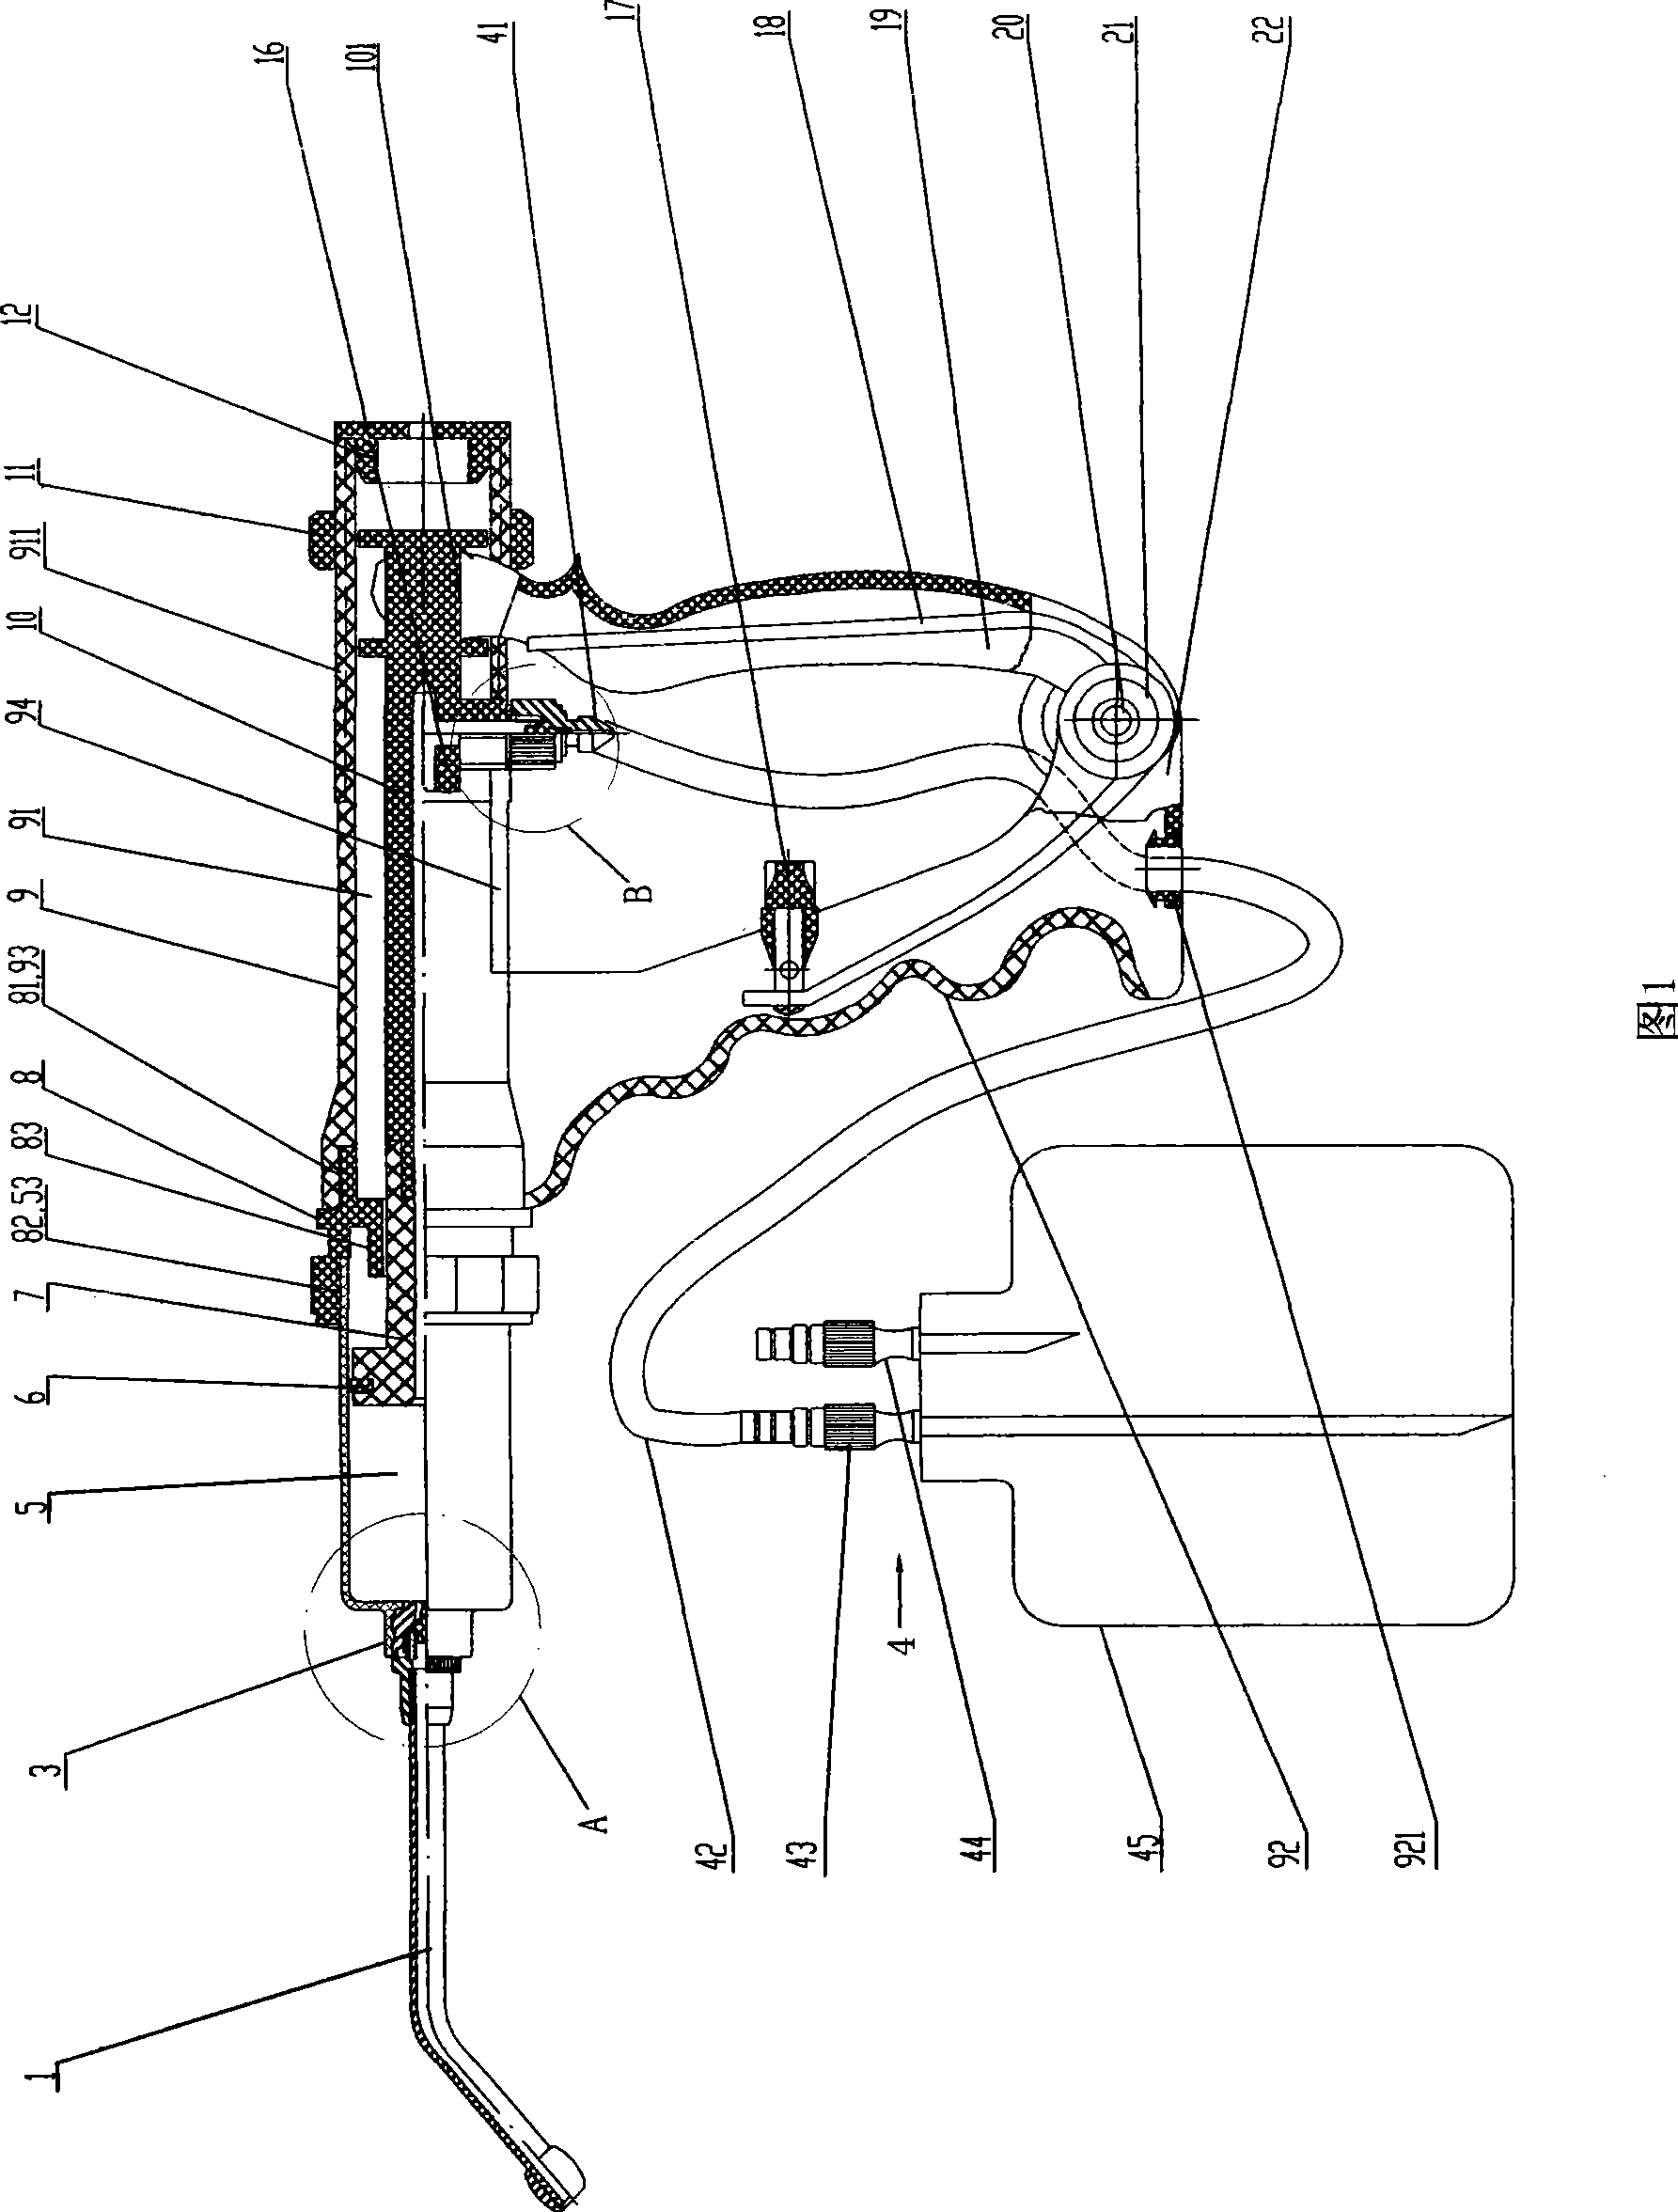 Continuous medicine-filling injector